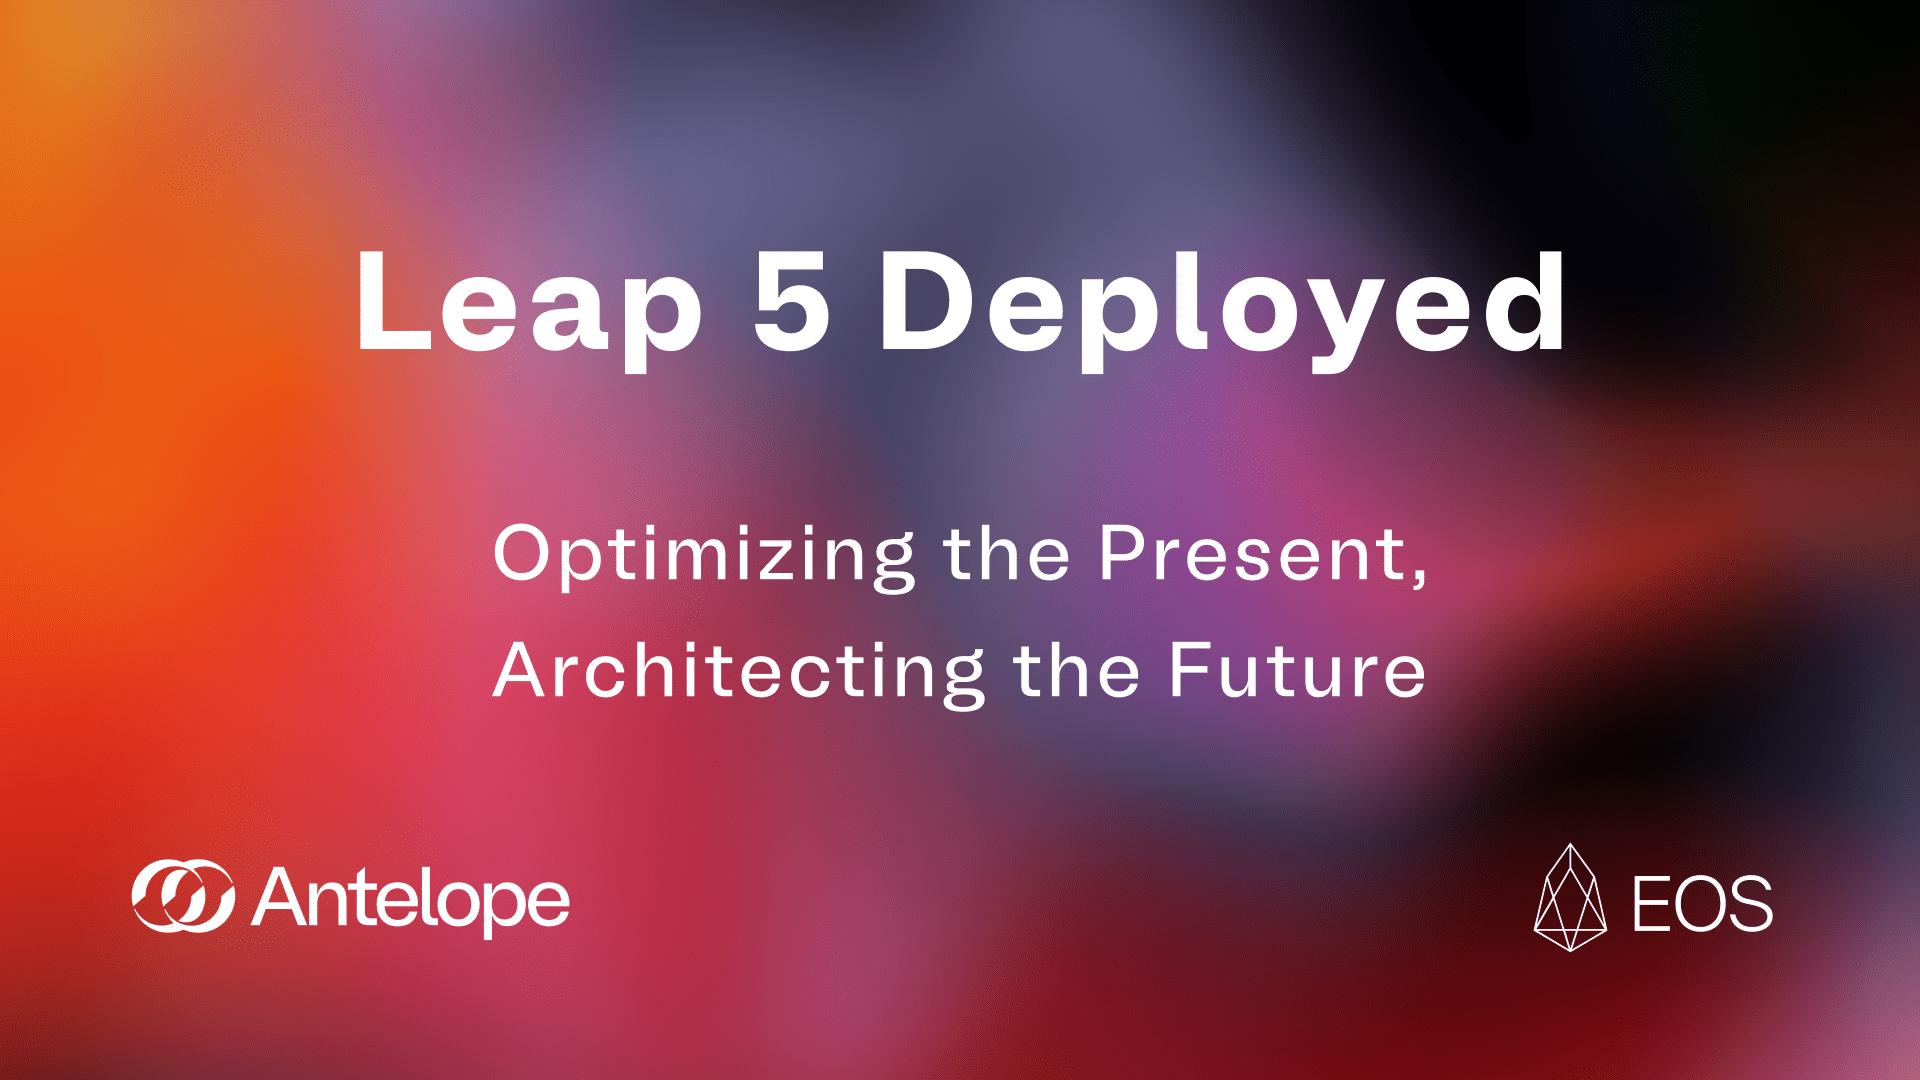 Leap-5.0-Released-Banner.png.jpg